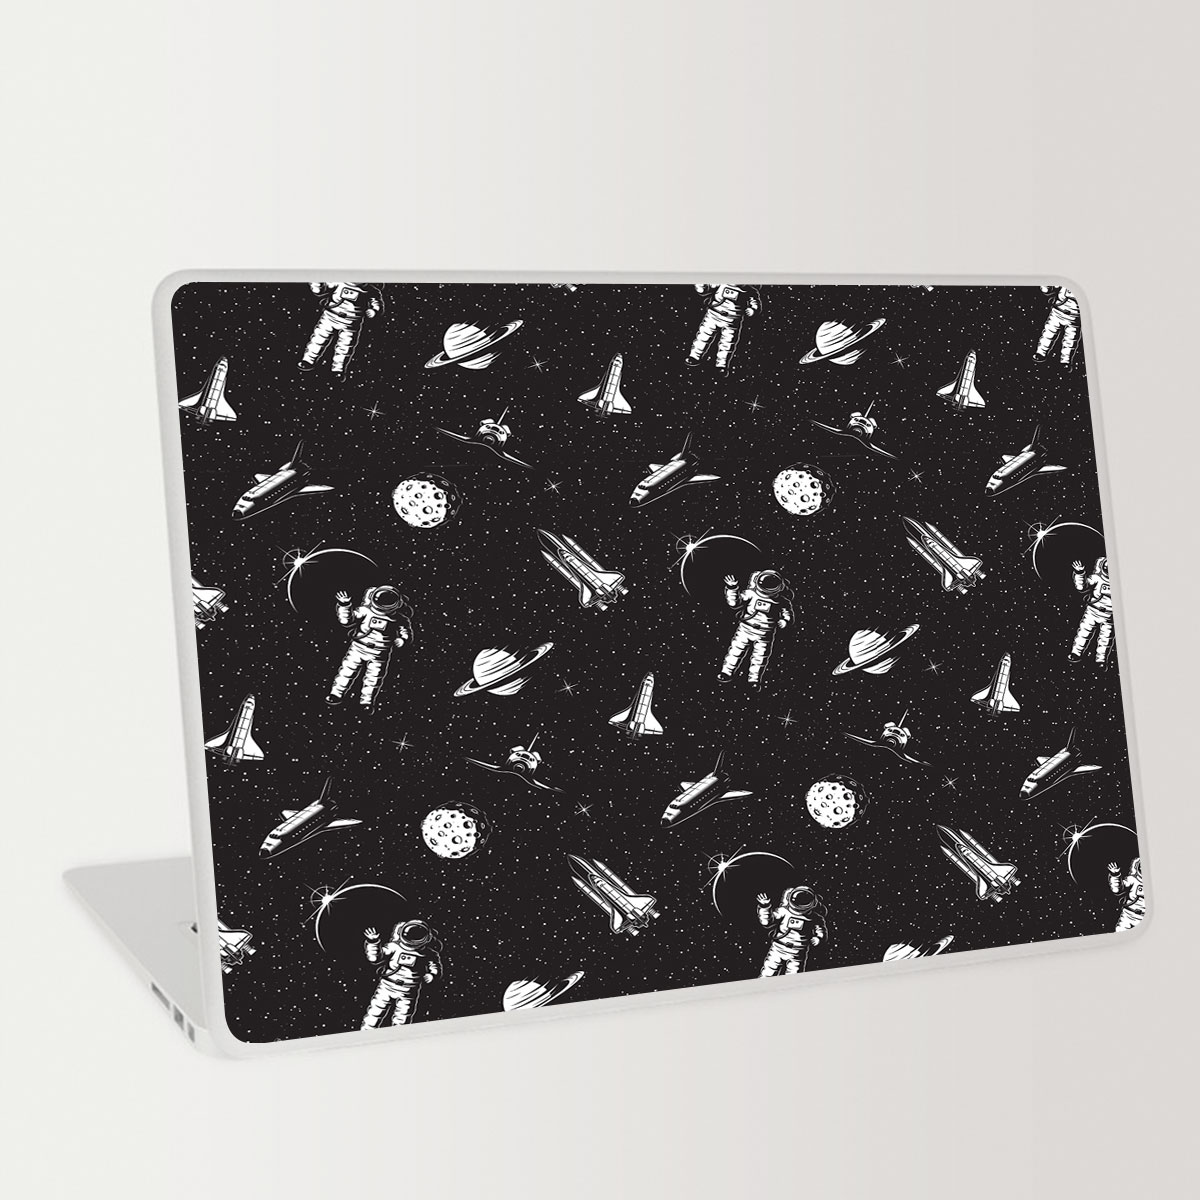 3D Black And White Astronaut Laptop Skin